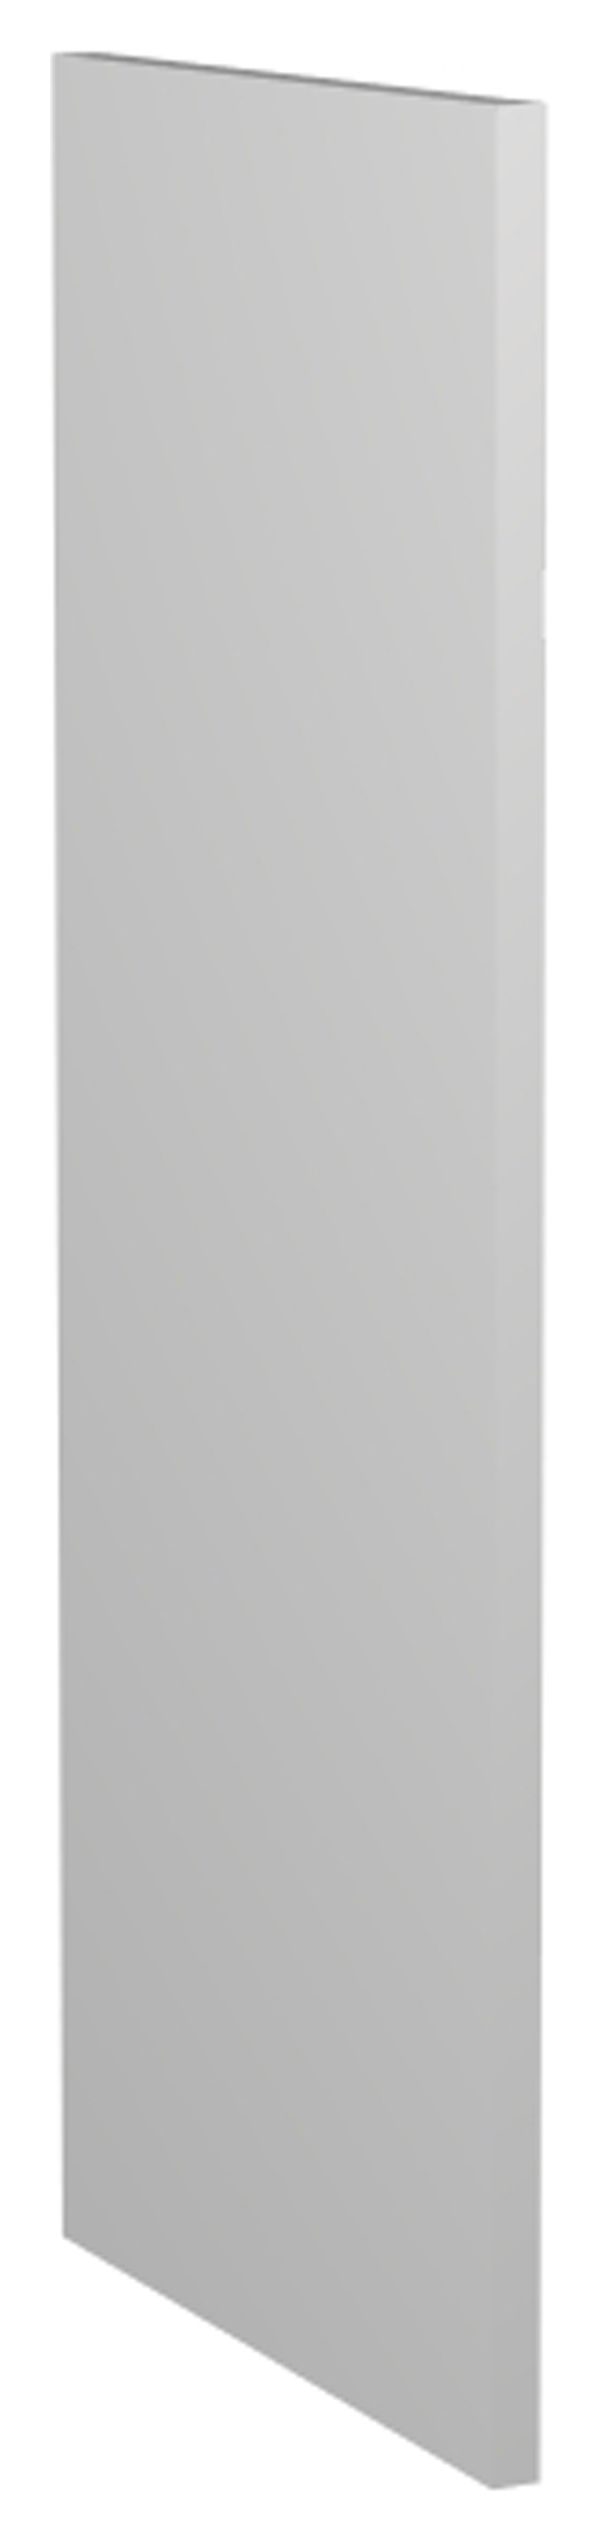 Image of Wickes Hertford Dove Grey Wall Decor End Panel - 18mm